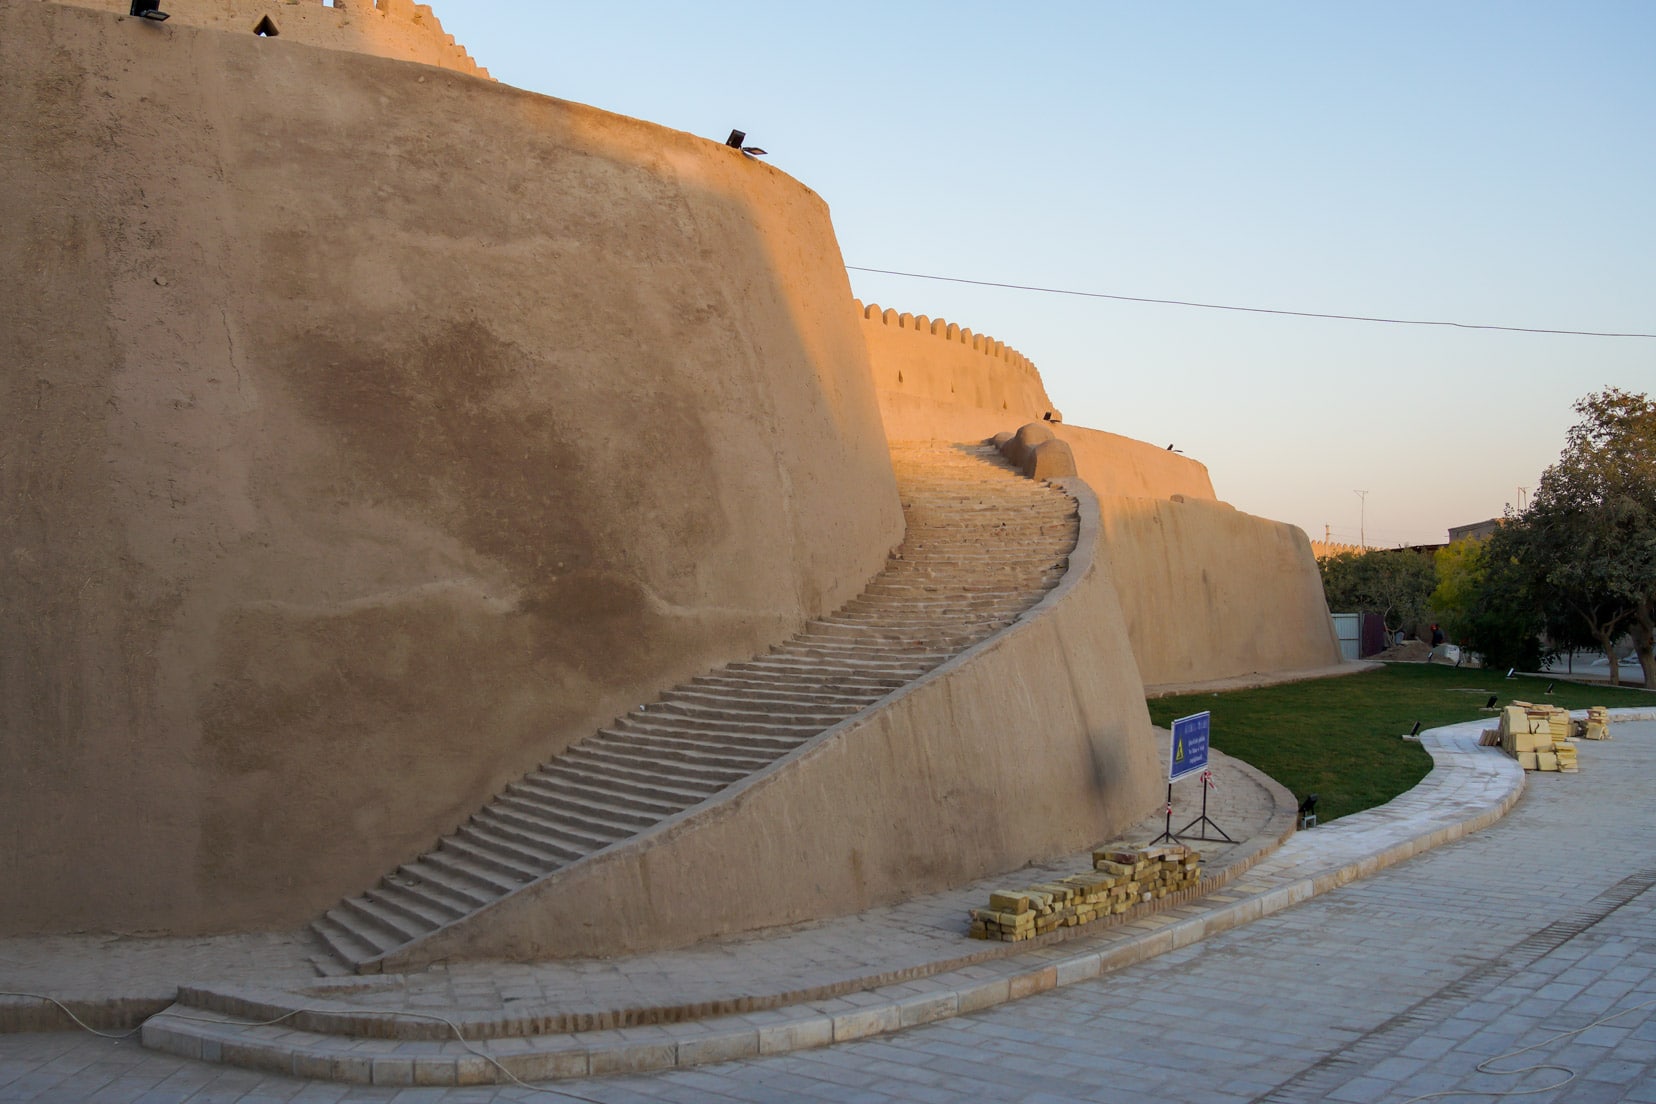 Stairs to Itchan Kala's walls, Khiva